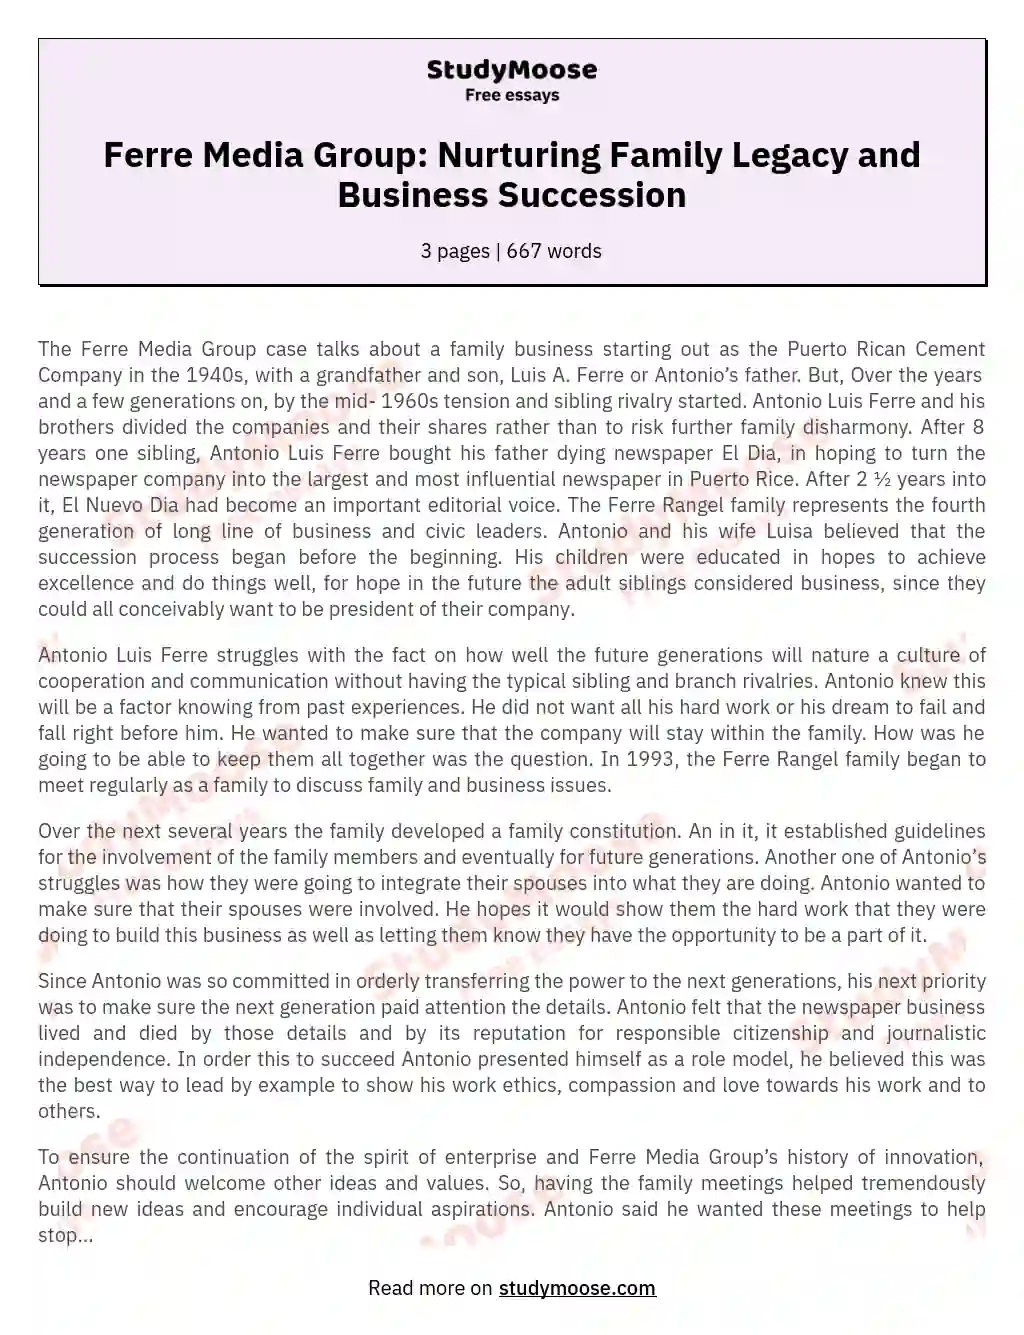 Ferre Media Group: Nurturing Family Legacy and Business Succession essay